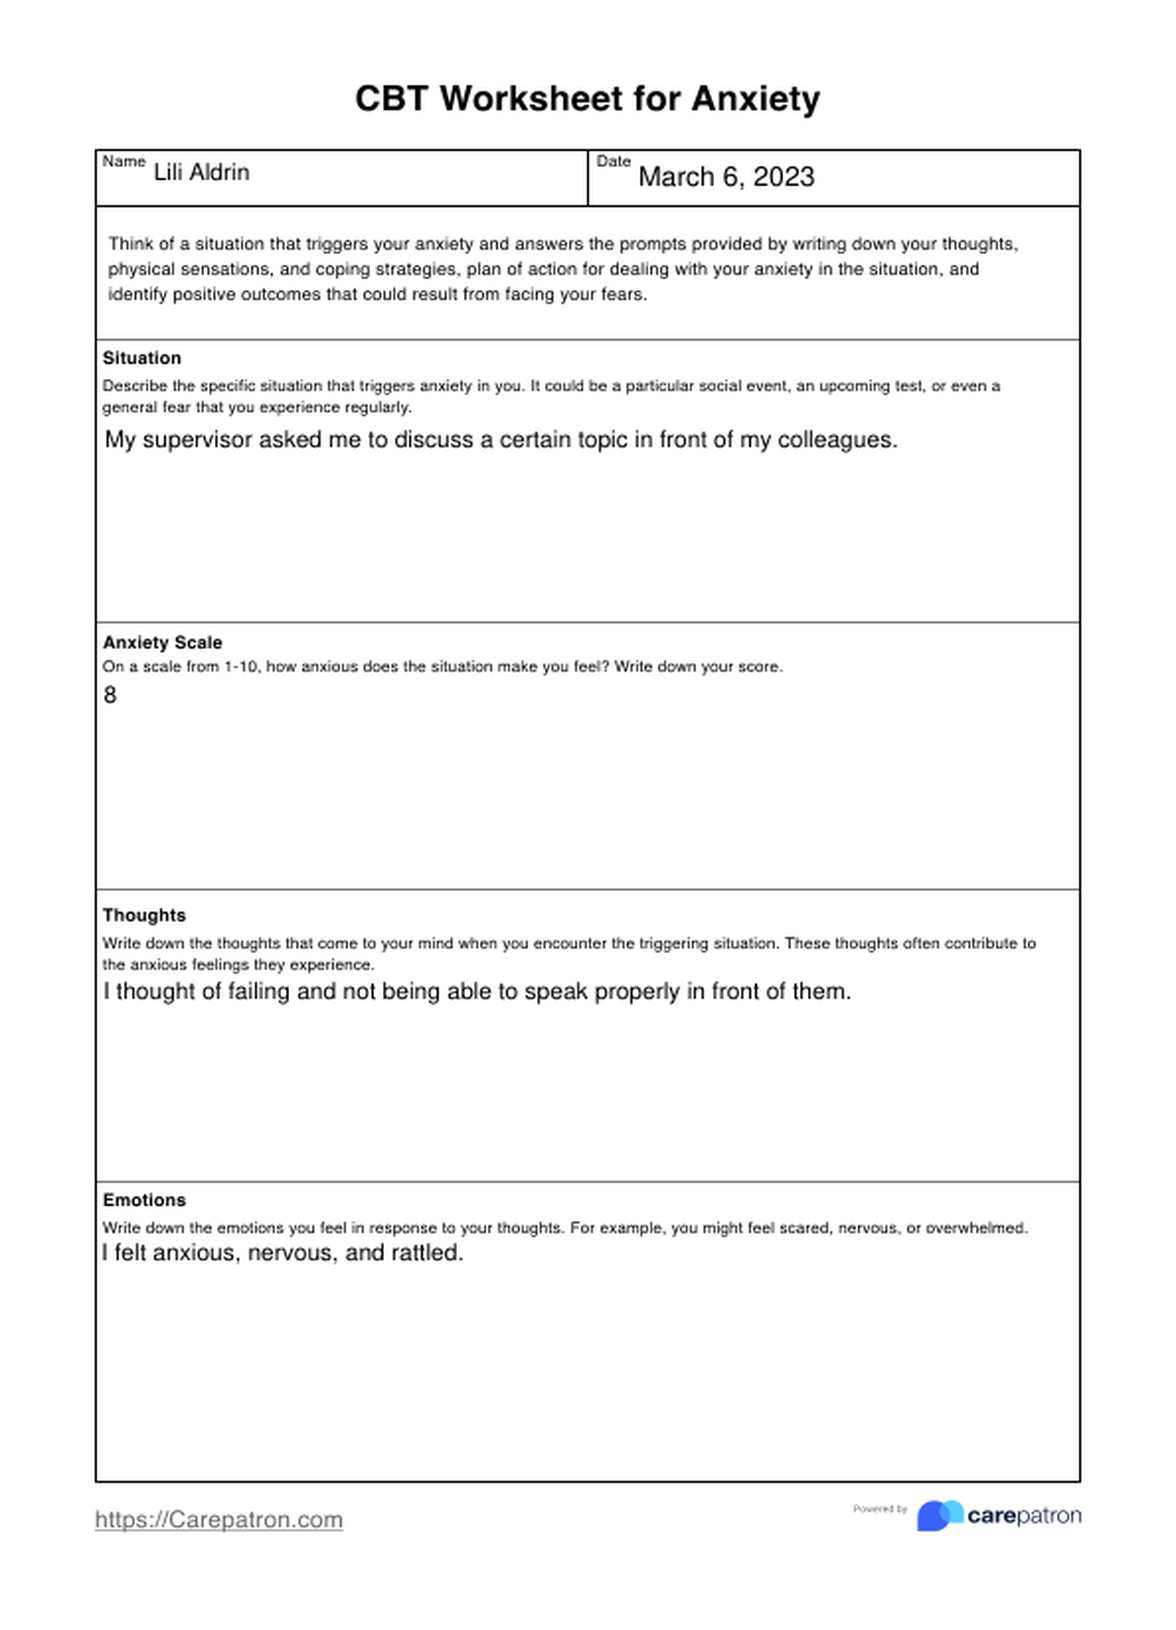 CBT Worksheet for Anxiety PDF Example